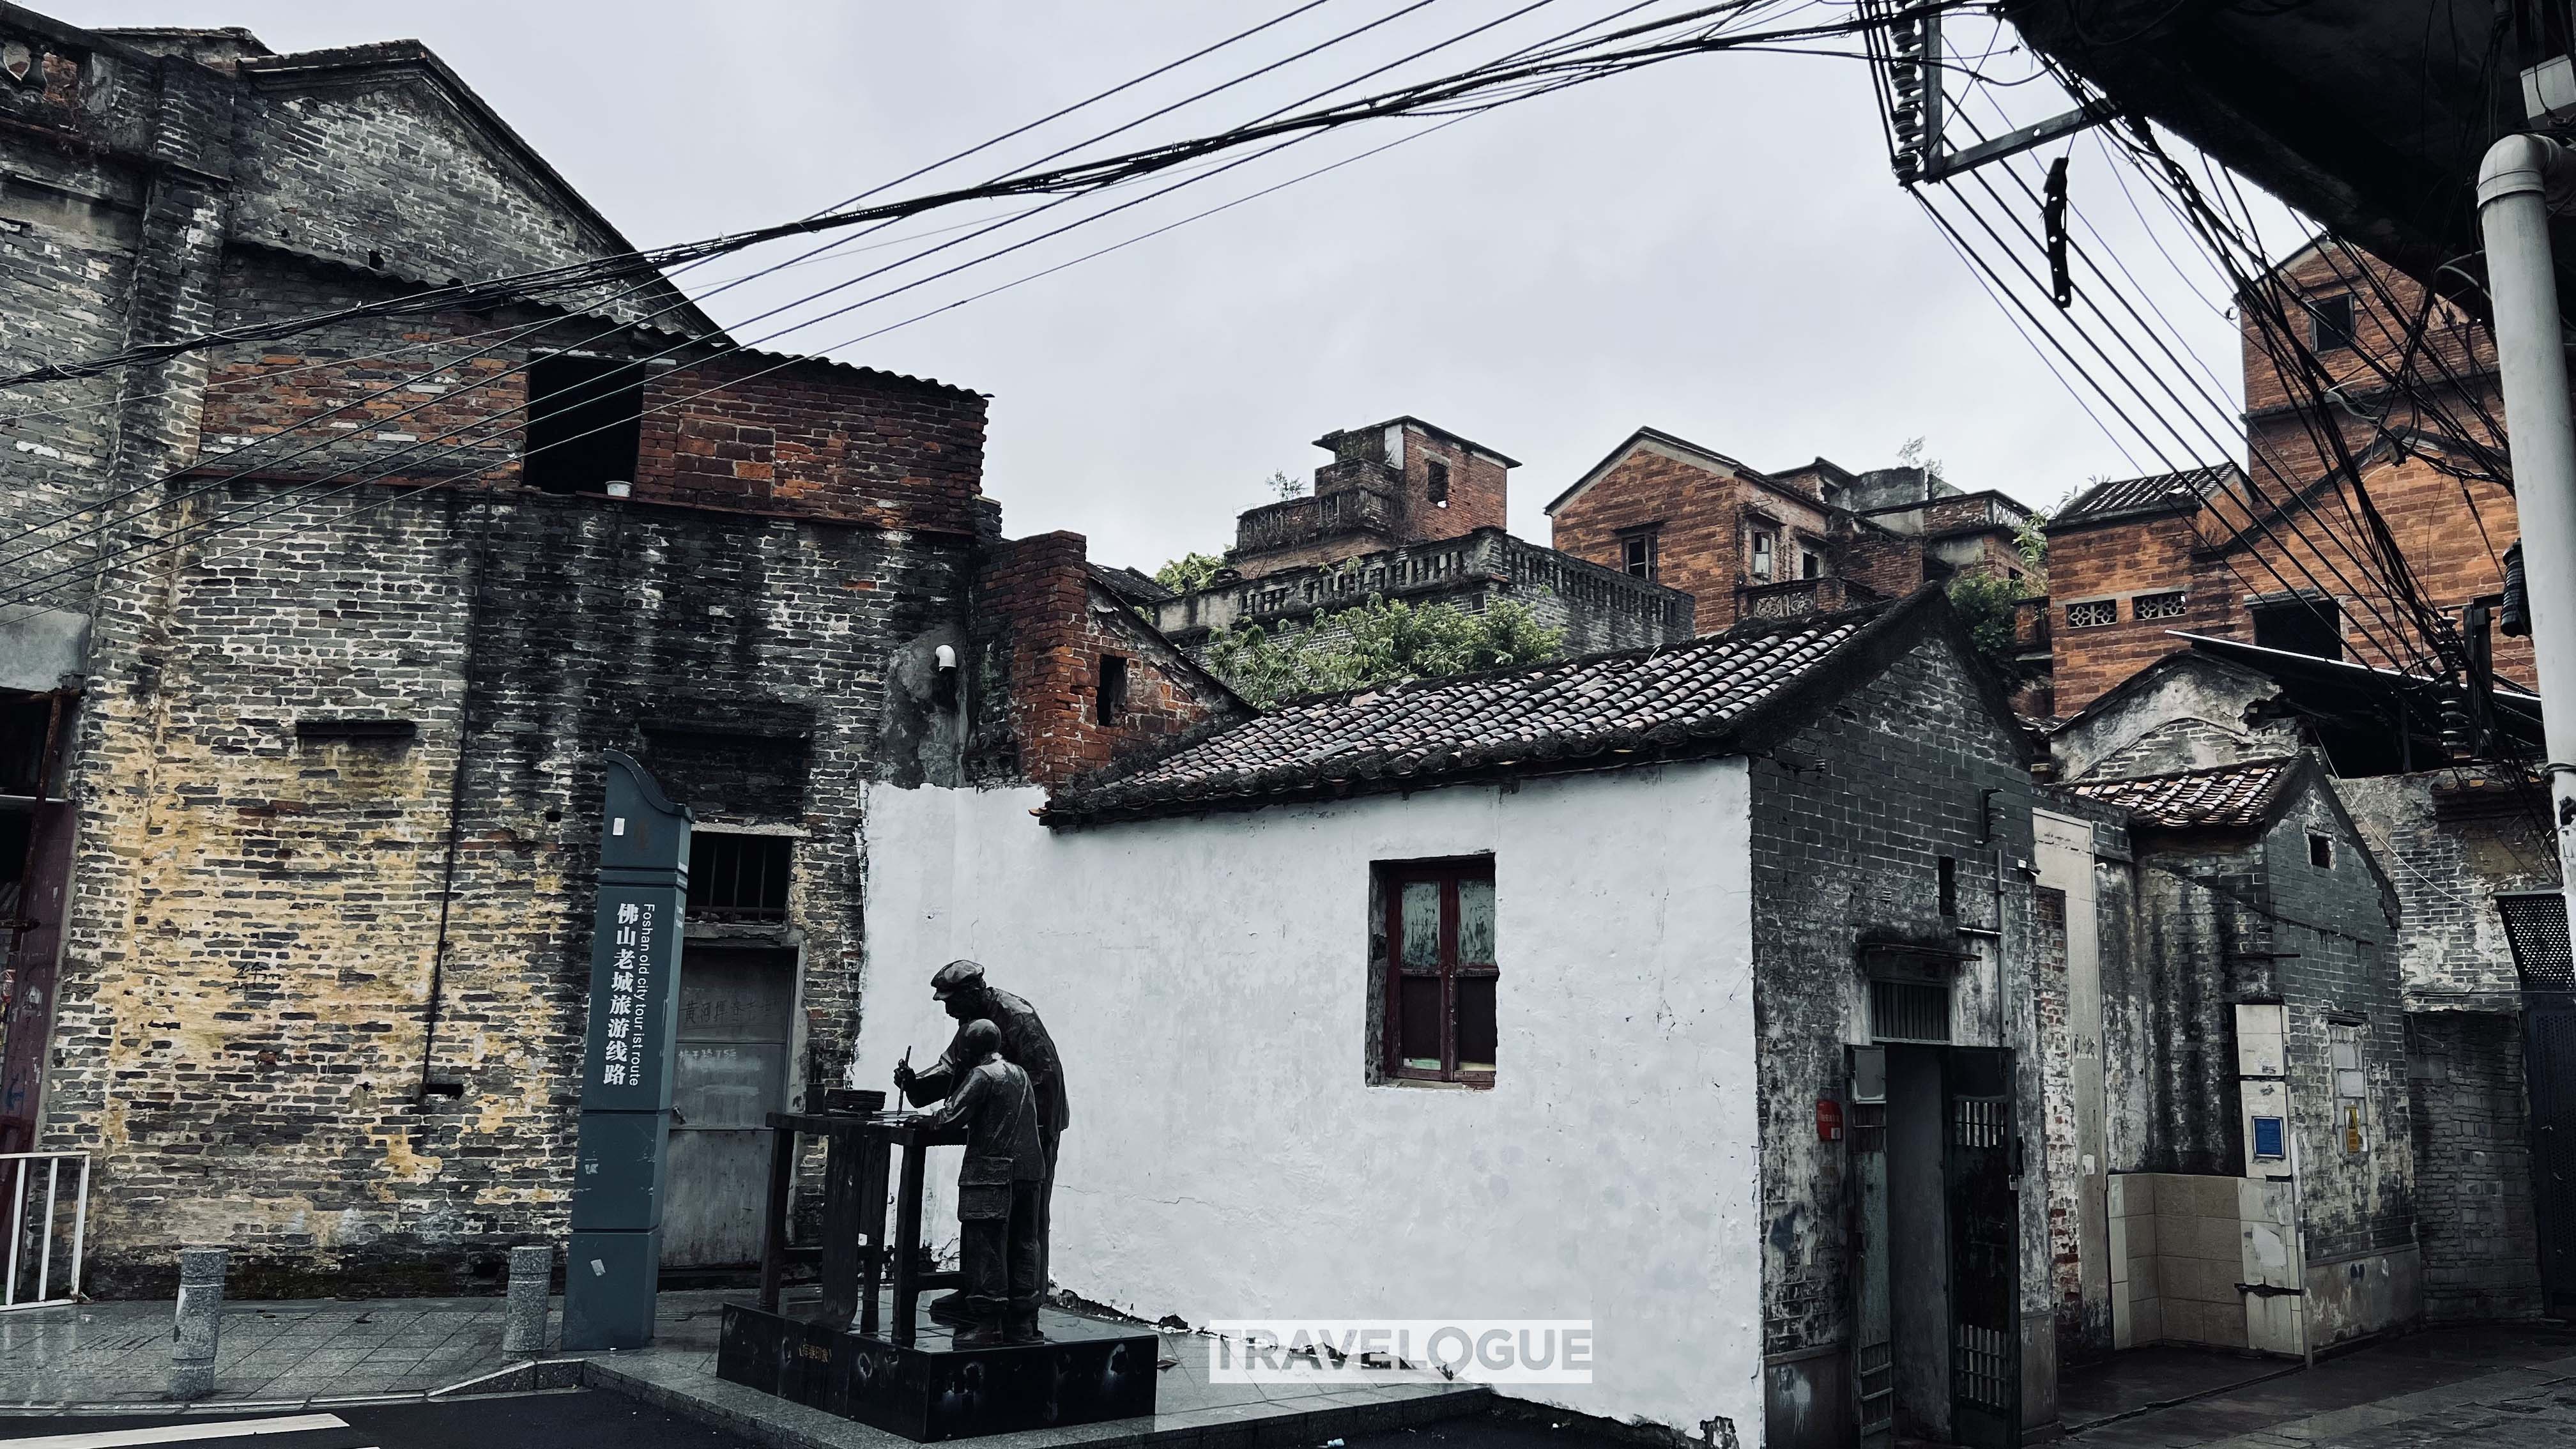 An undated photo shows the view of the old streets of Foshan, Guangdong Province. /CGTN